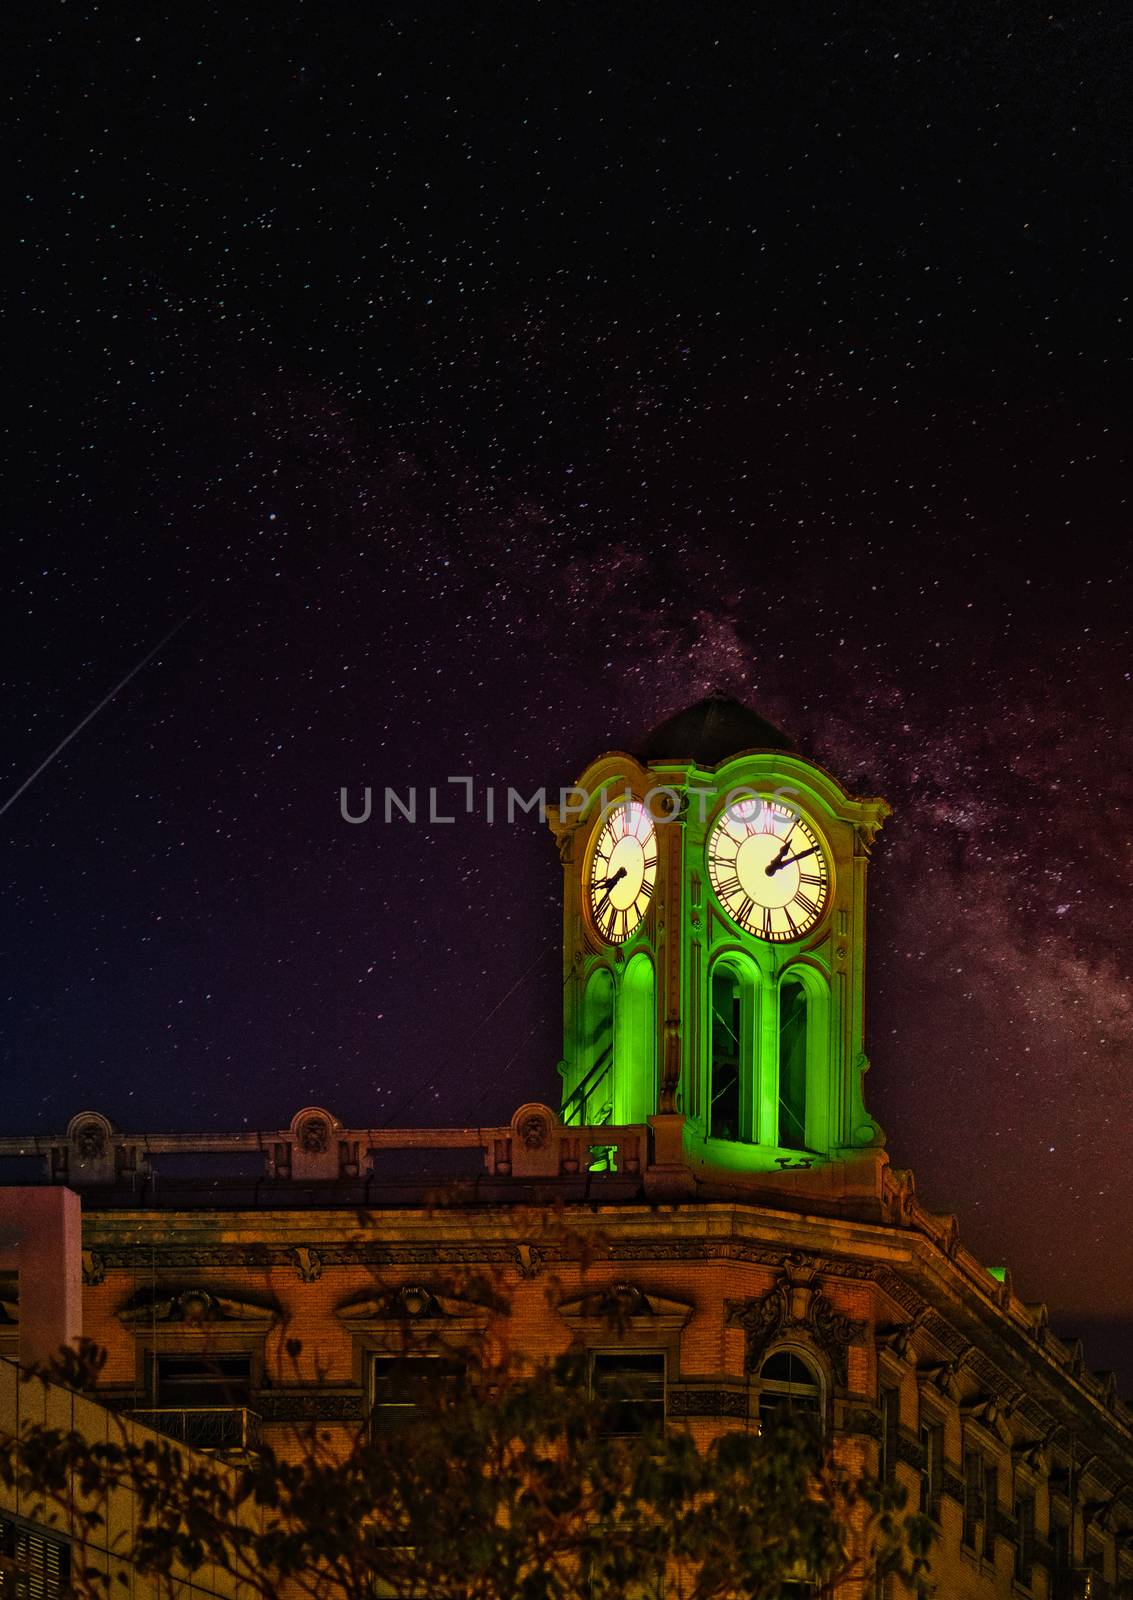 Lighted Clock Tower on Starry Night in Long Beach